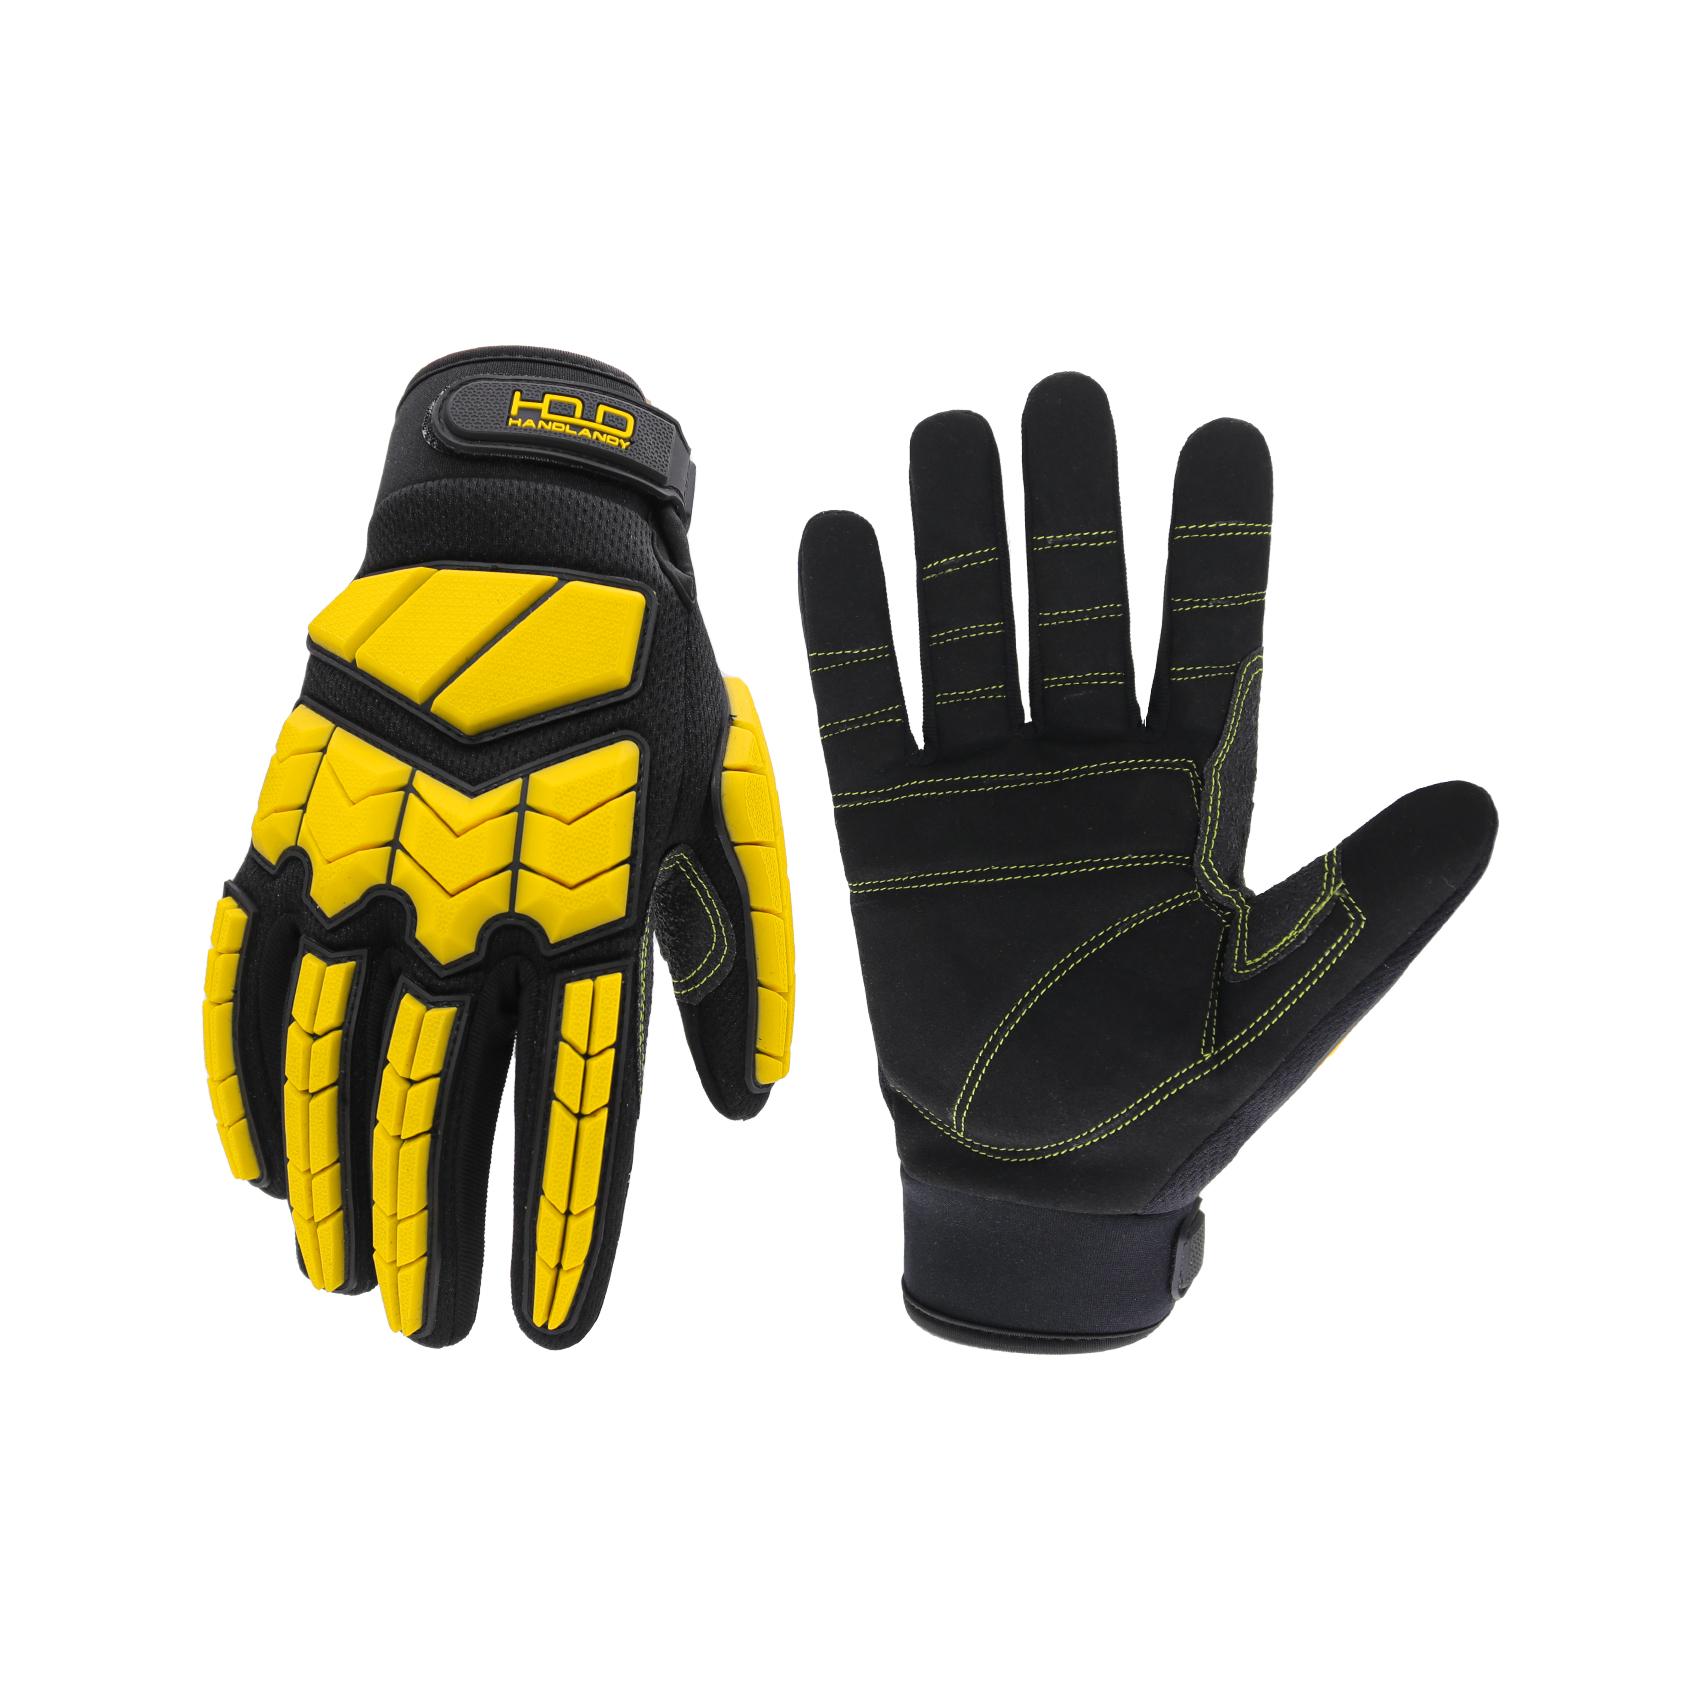 H642 PRISAFETY Anti Vibration Work Gloves Men,TPR Impact Protection Gloves,SBR Fingers & Palm Padded Safety Impact Reducing Mechanic Gloves